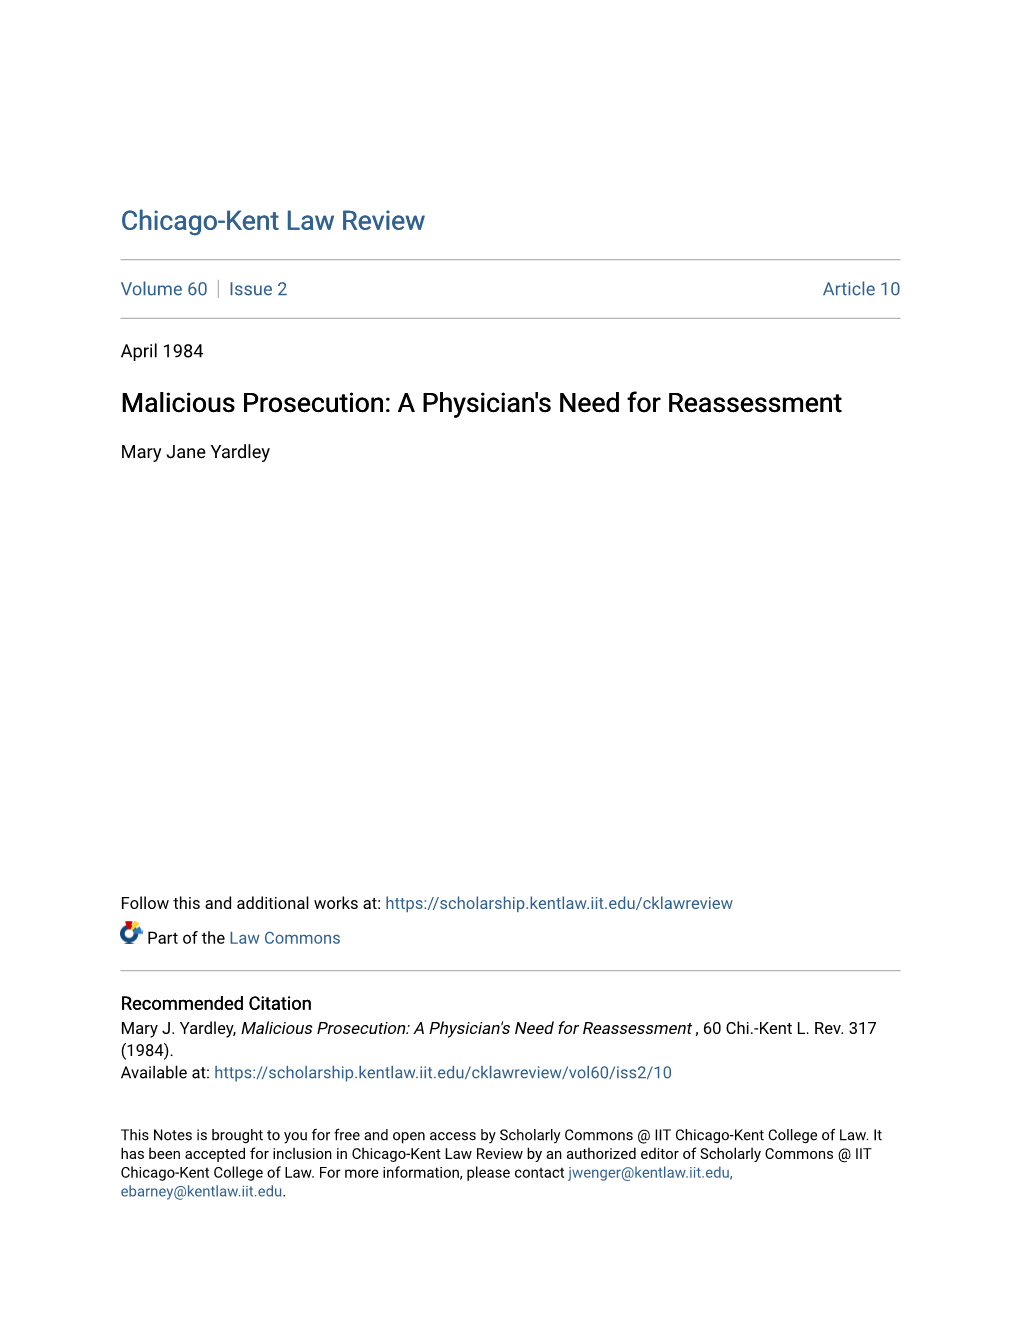 Malicious Prosecution: a Physician's Need for Reassessment